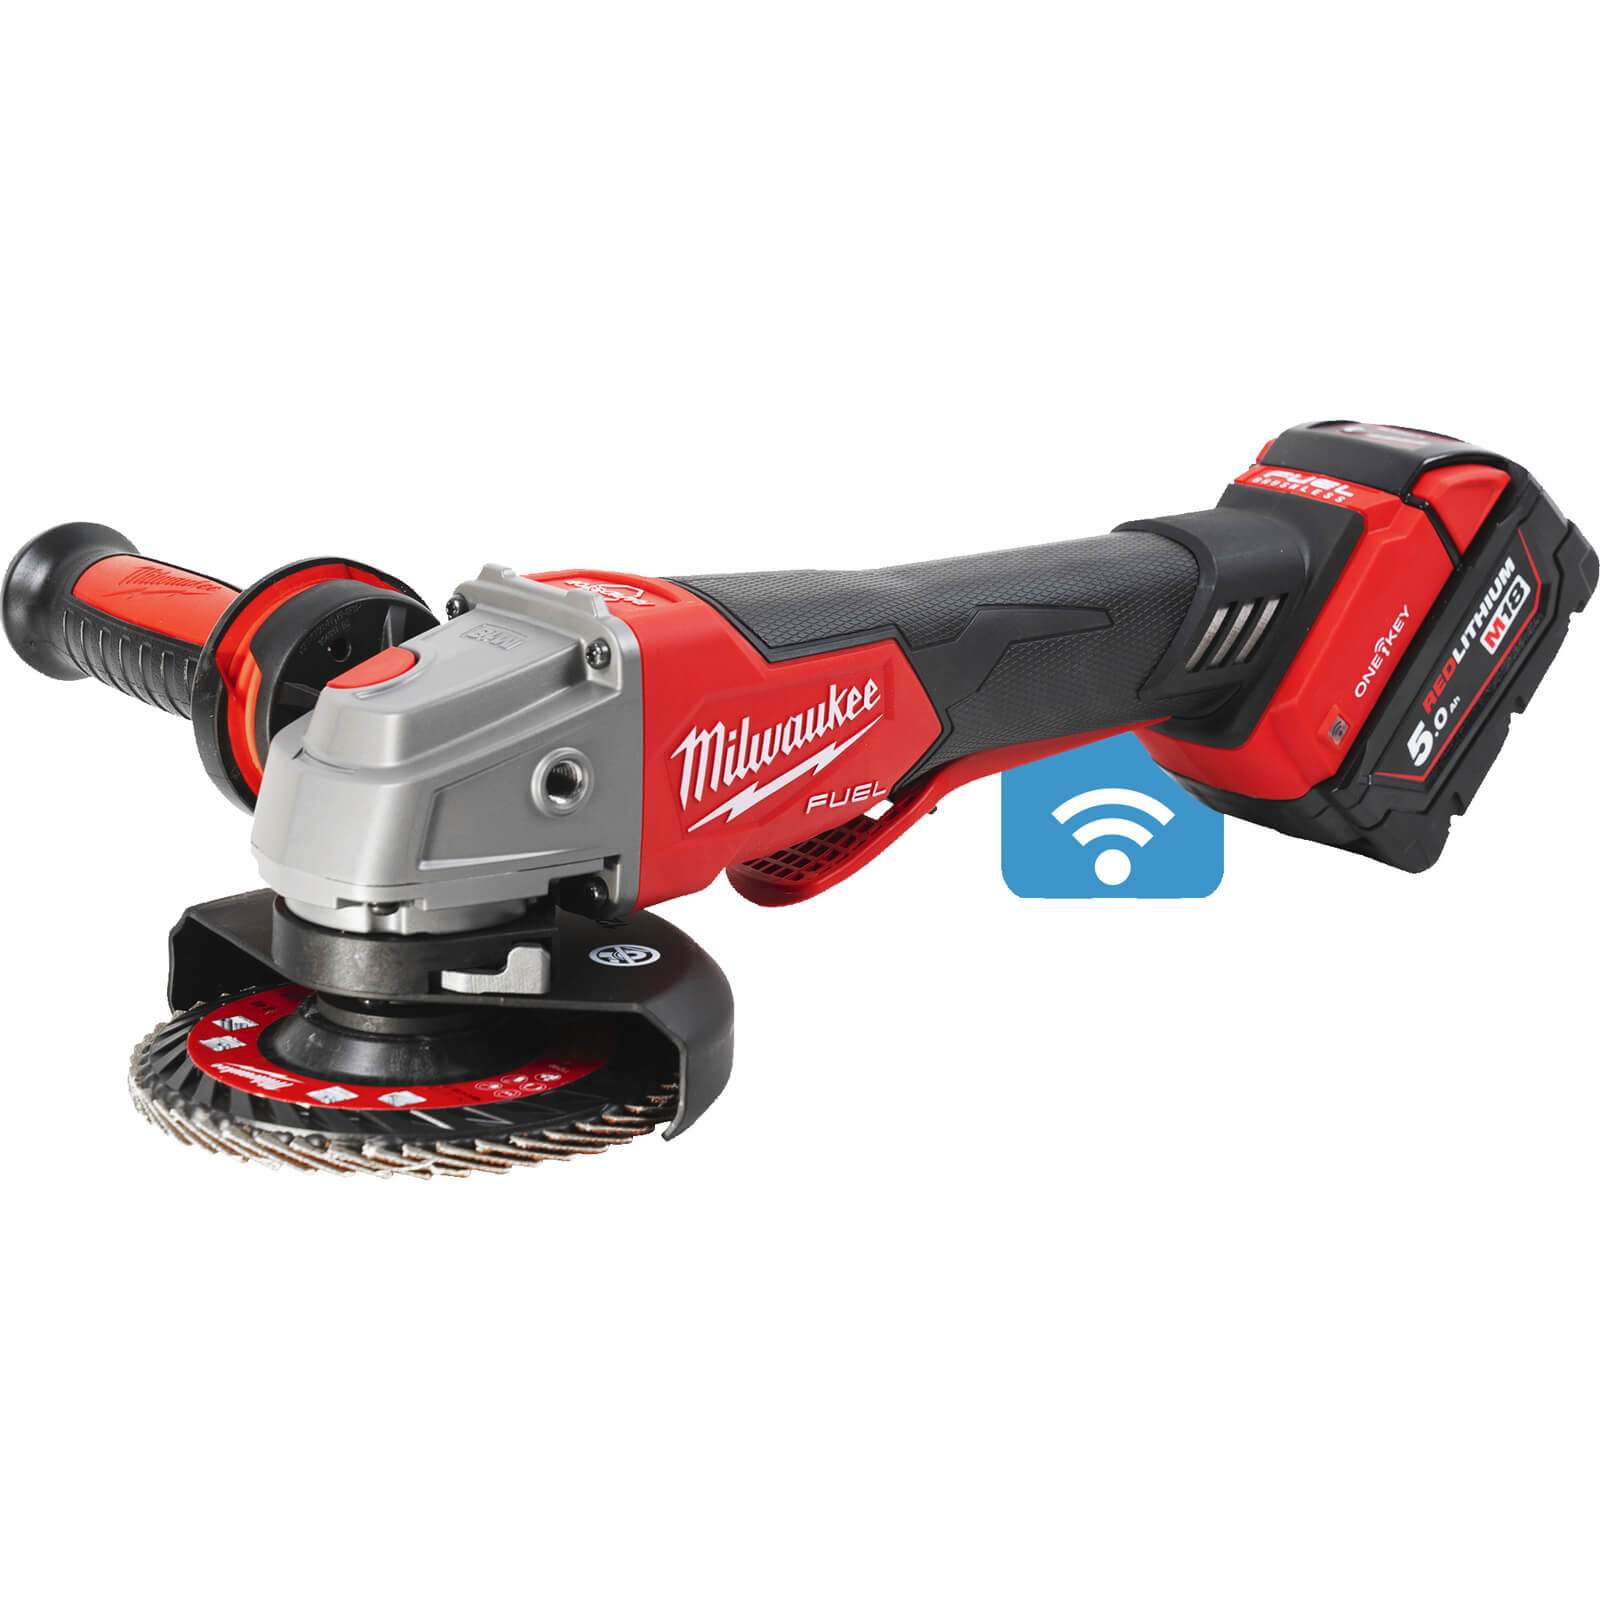 Milwaukee M18 ONEFSAG115XPDB Fuel 18v Cordless Brushless Angle Grinder 115mm 2 x 5.5ah Li-ion Charger Case